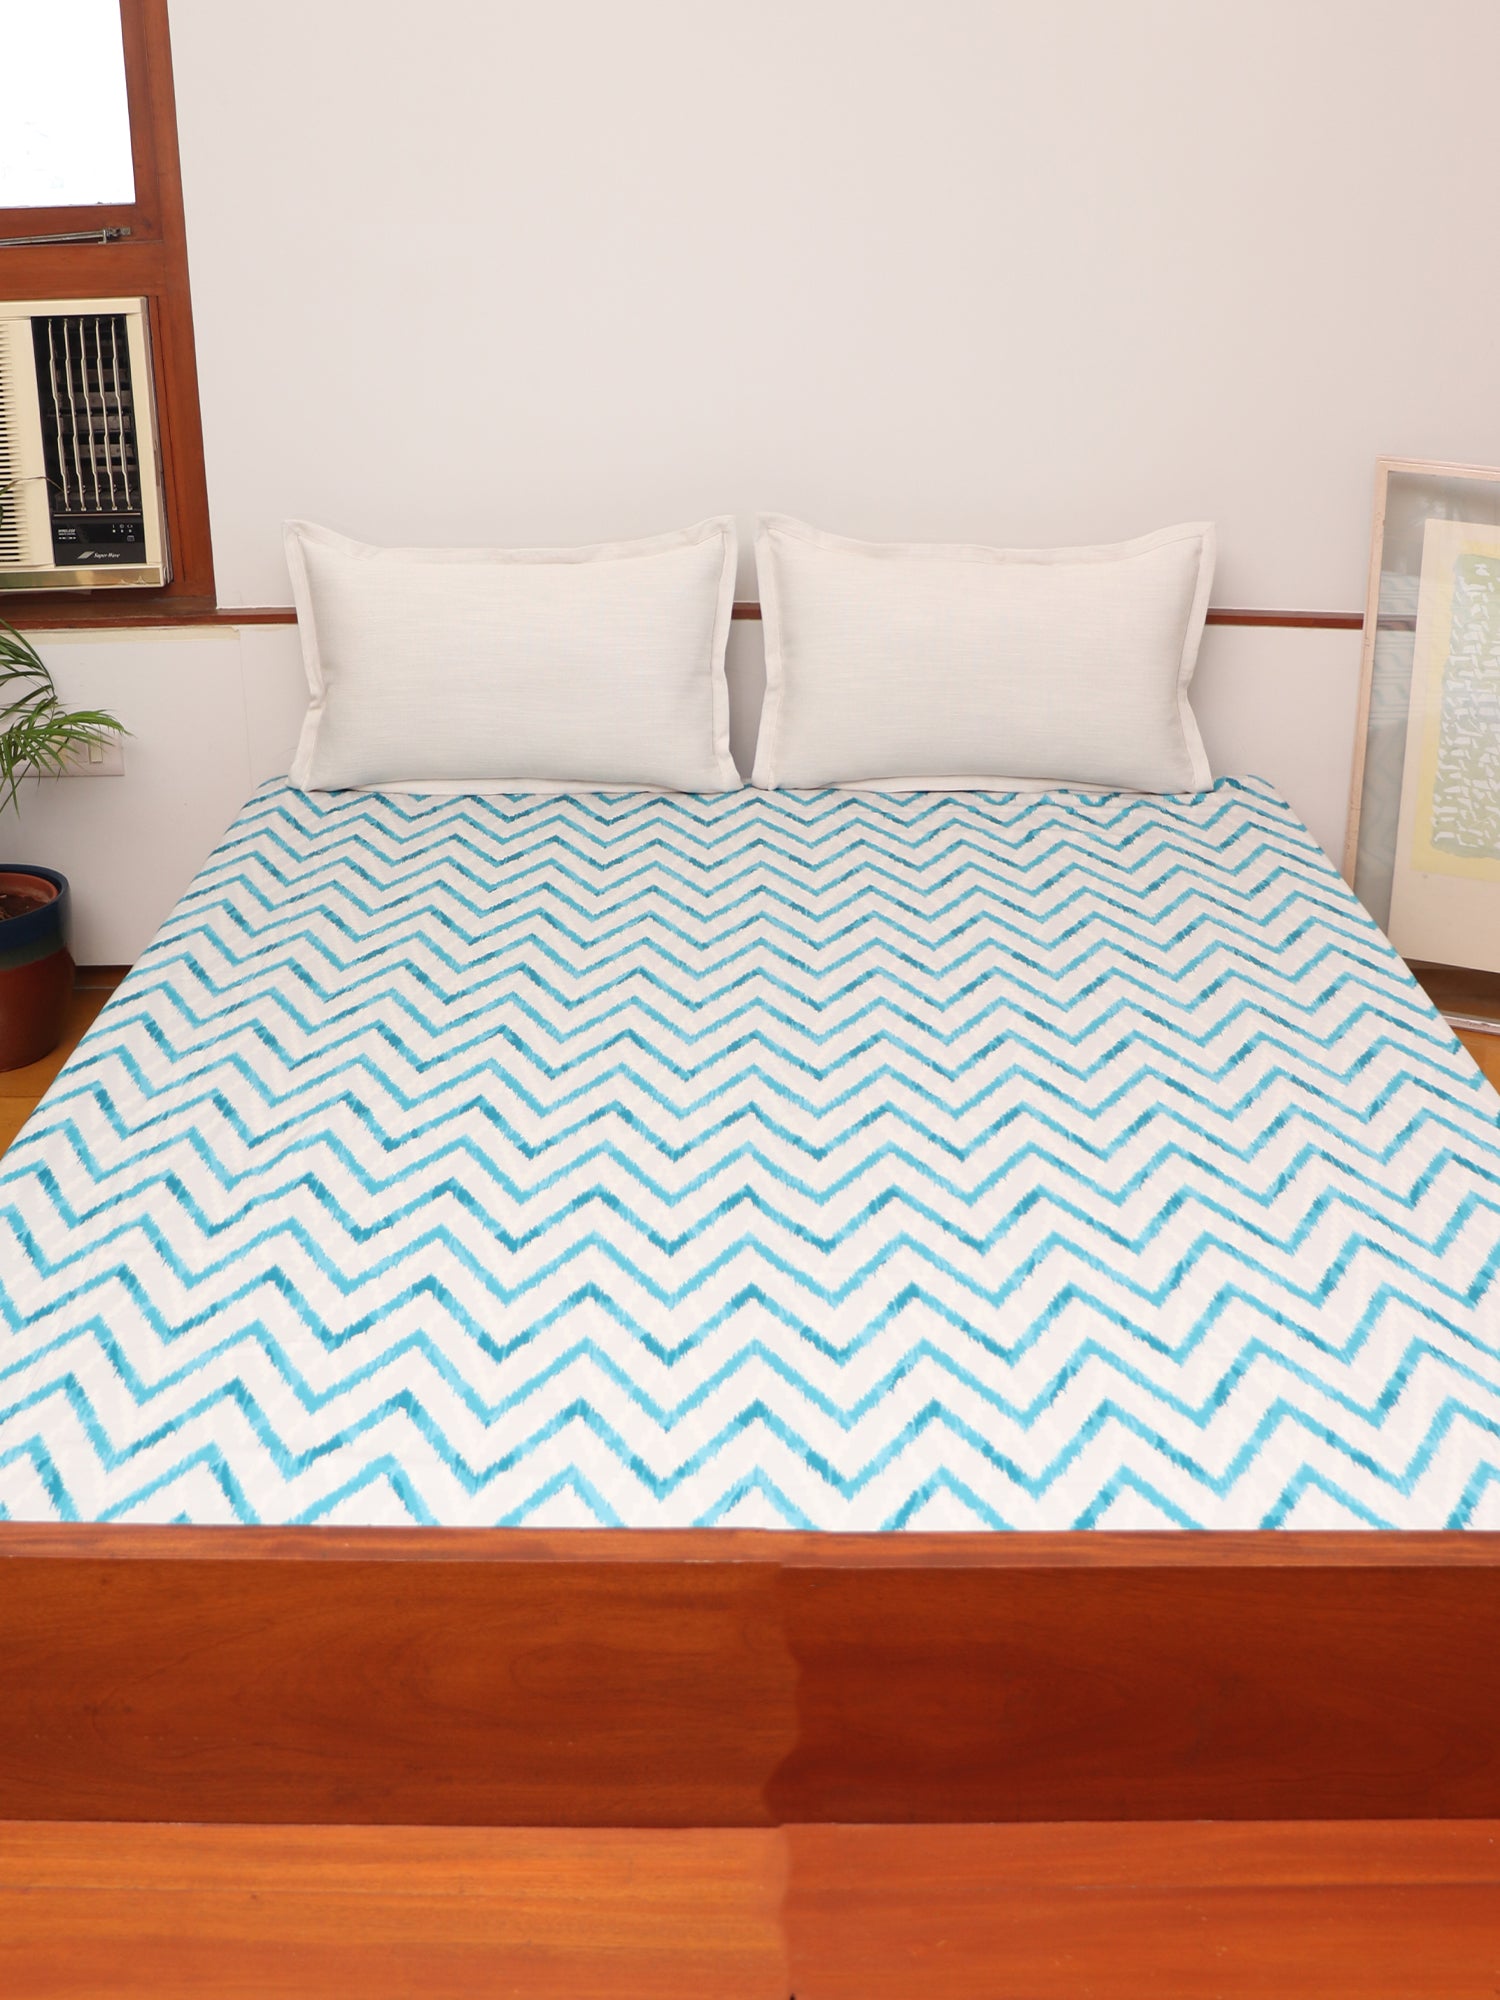 Printed Bedcover for Double Bed with 2 Pillow Covers | Queen Size - Blue Chevron Pattern | Bedcover 90 x 108inches (7.5x9ft), Pillow Covers 17x27in